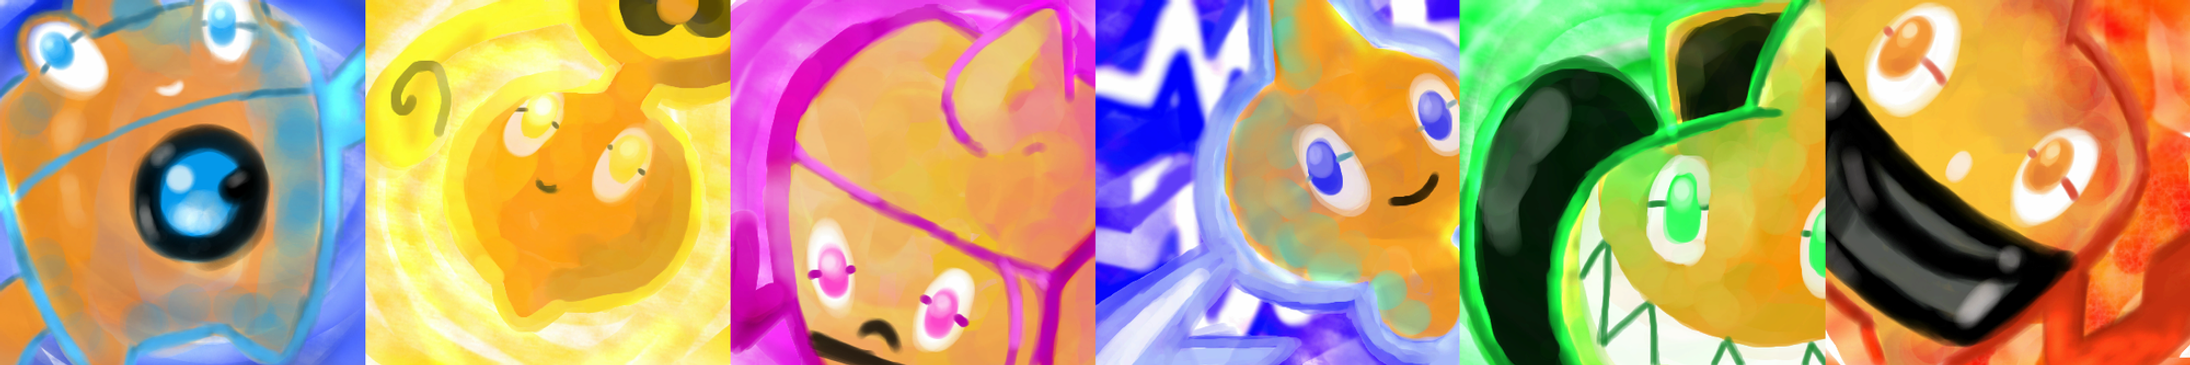 Rotom_Formation_by_crayon_chewer.png